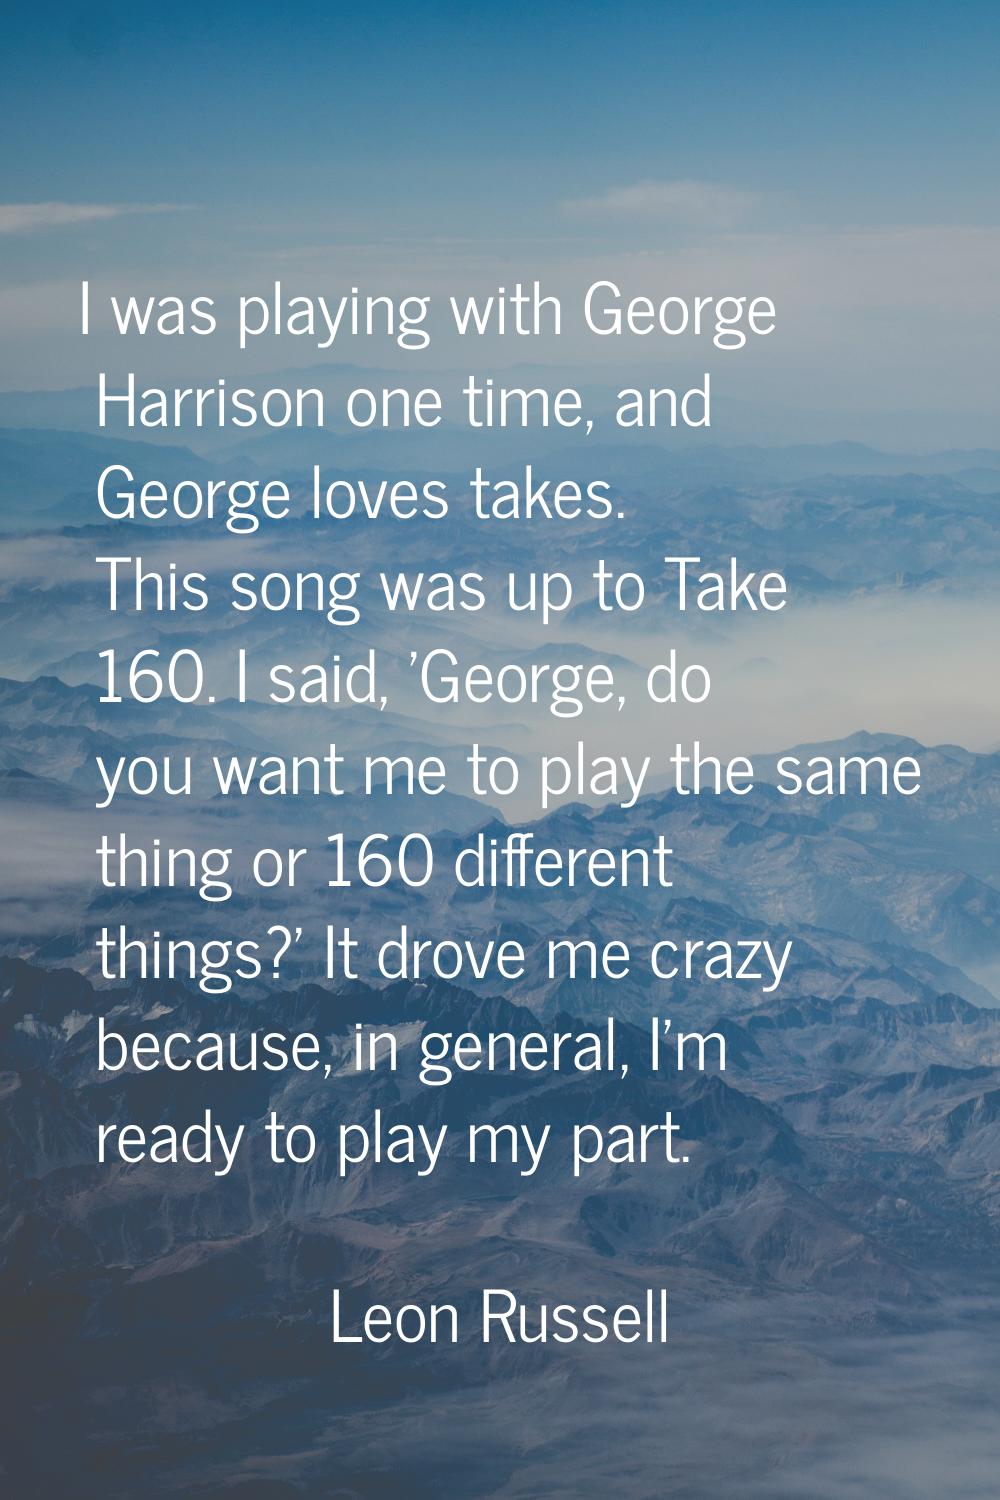 I was playing with George Harrison one time, and George loves takes. This song was up to Take 160. 